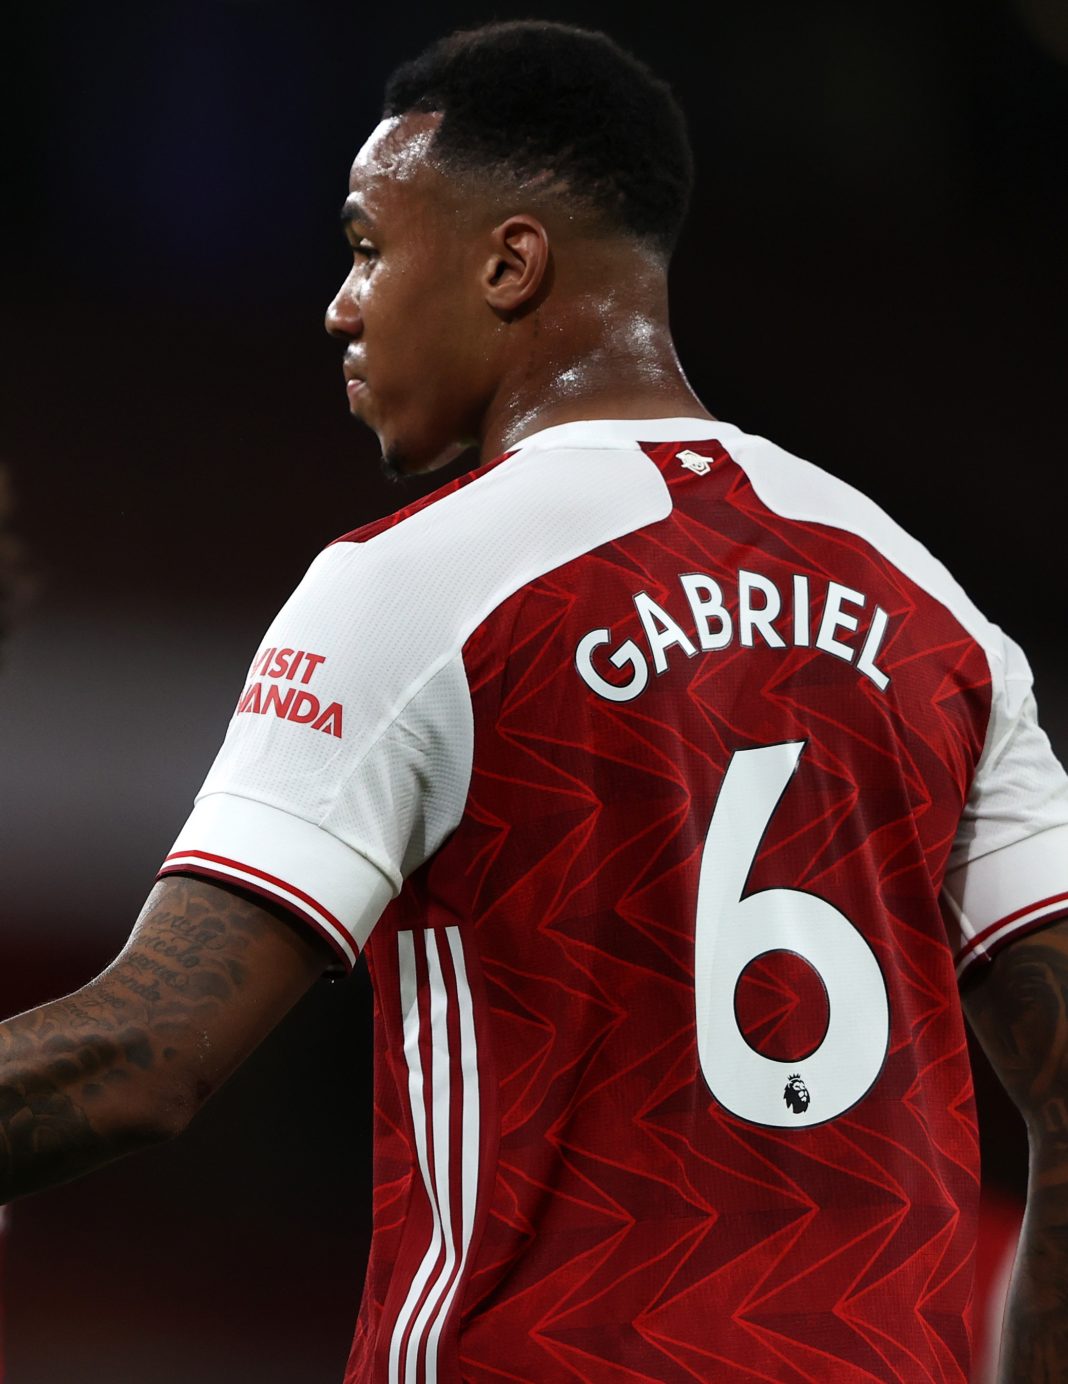 LONDON, ENGLAND - SEPTEMBER 19: Gabriel after scoring his team's first goal during the Premier League match between Arsenal and West Ham United at Emirates Stadium on September 19, 2020 in London, England. (Photo by Ian Walton - Pool/Getty Images)